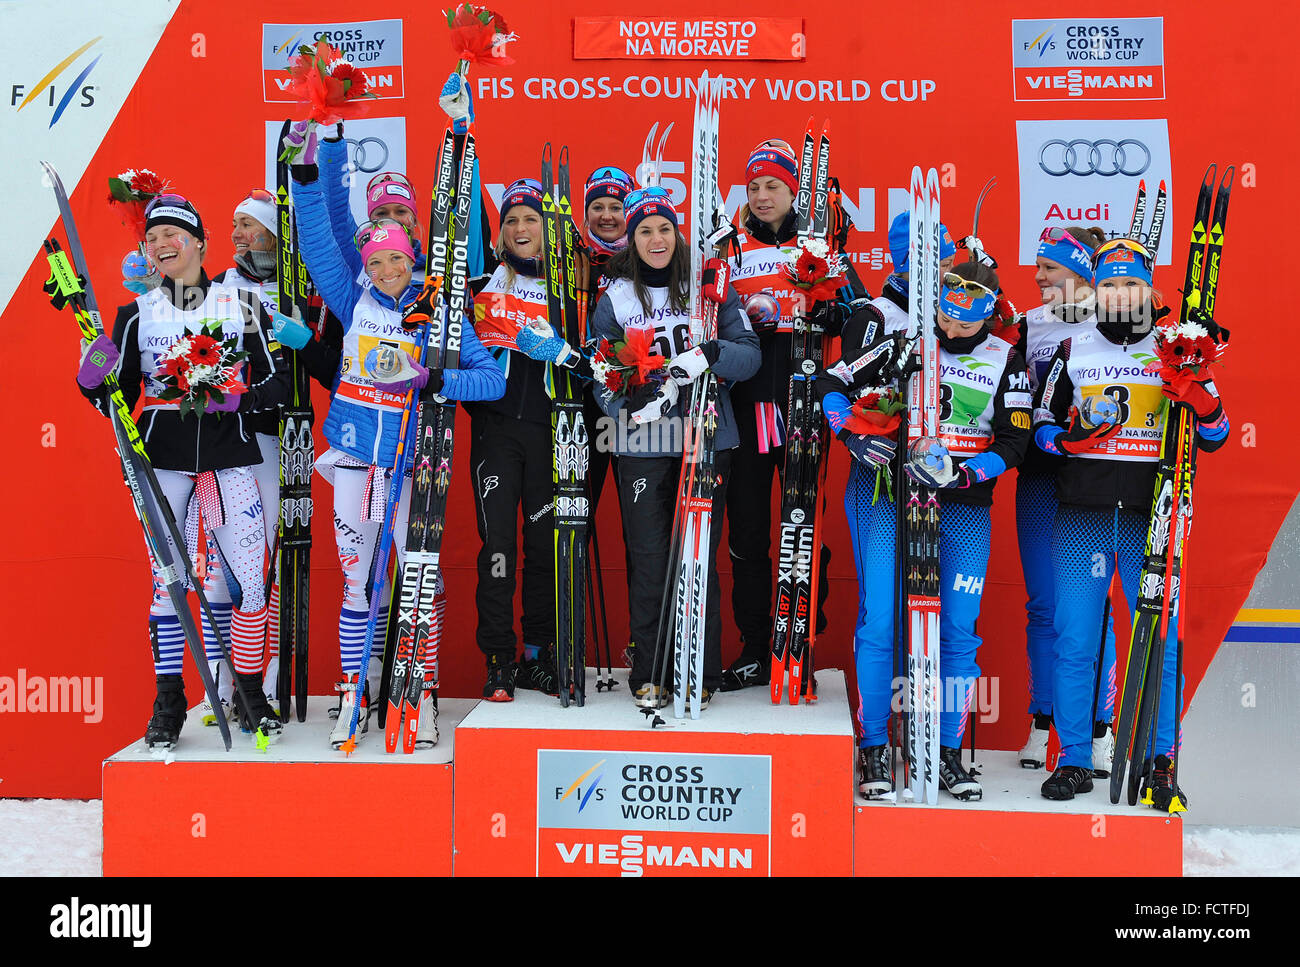 World Cup cross-country skiing, women - 4x5 km relay, January 24, 2016, Nove Mesto na Morave, Czech Republic. From left: second placed Jessica Diggins, Sophie Caldwell, Elizabeth Stephen and Sadie Bjornsen (of USA), winners Therese Johaug, Heidi Weng, Ingvild Ostberg and Astrid Jacobsen (of Norway) and third placed Anne Kyllonen, Krista Parmakoski, Kerttu Niskanen and Riitta-Liisa Roponen (of Finland). (CTK Photo/Lubos Pavlicek) Stock Photo